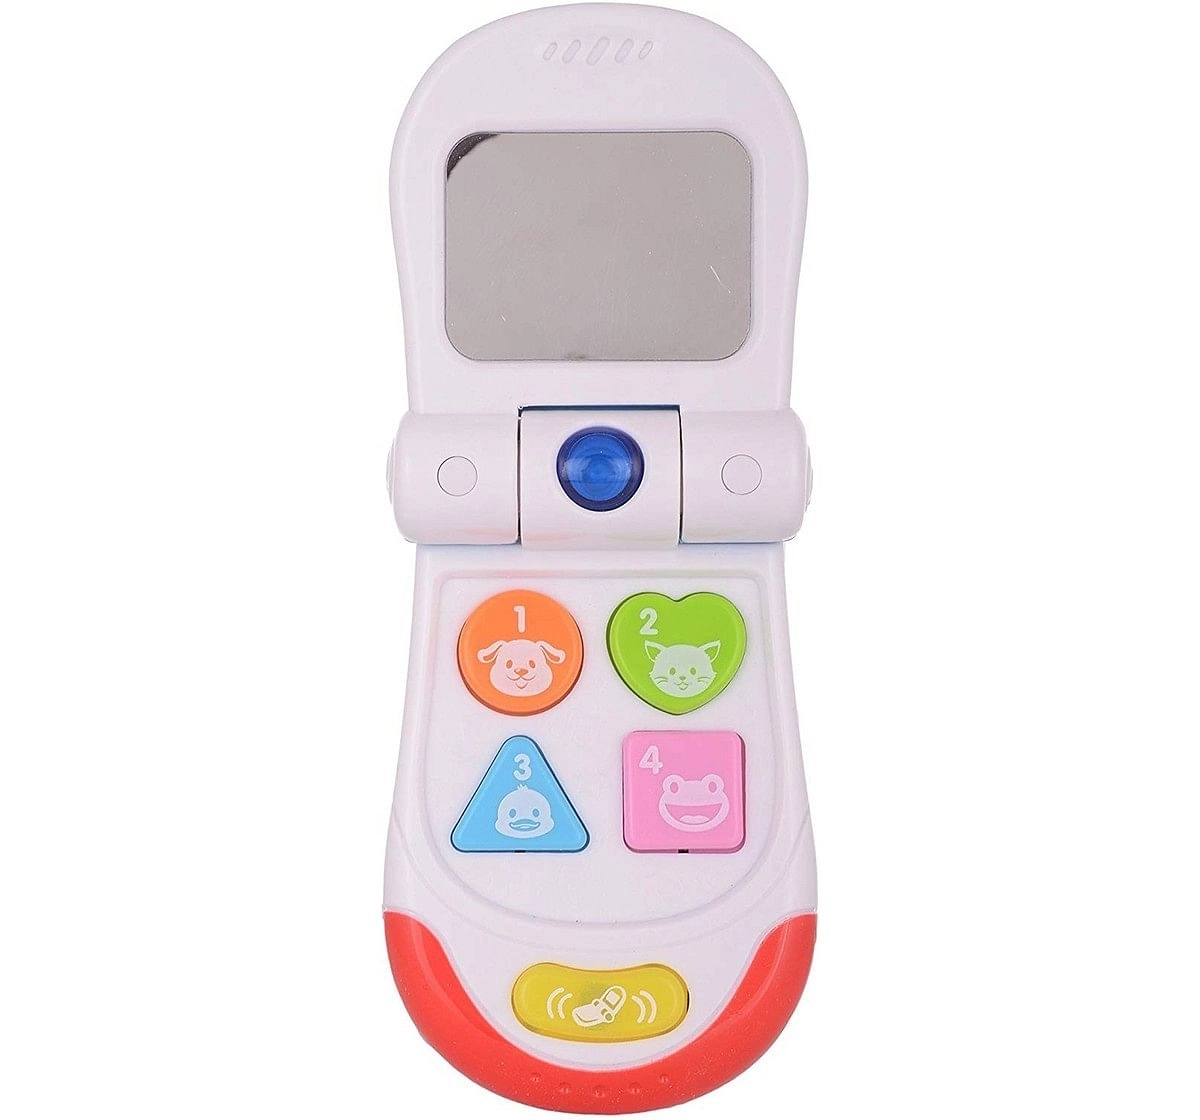 Winfun My Flip up Sounds Phone - Blue Learning Toys for Kids age 3M+ (Blue)